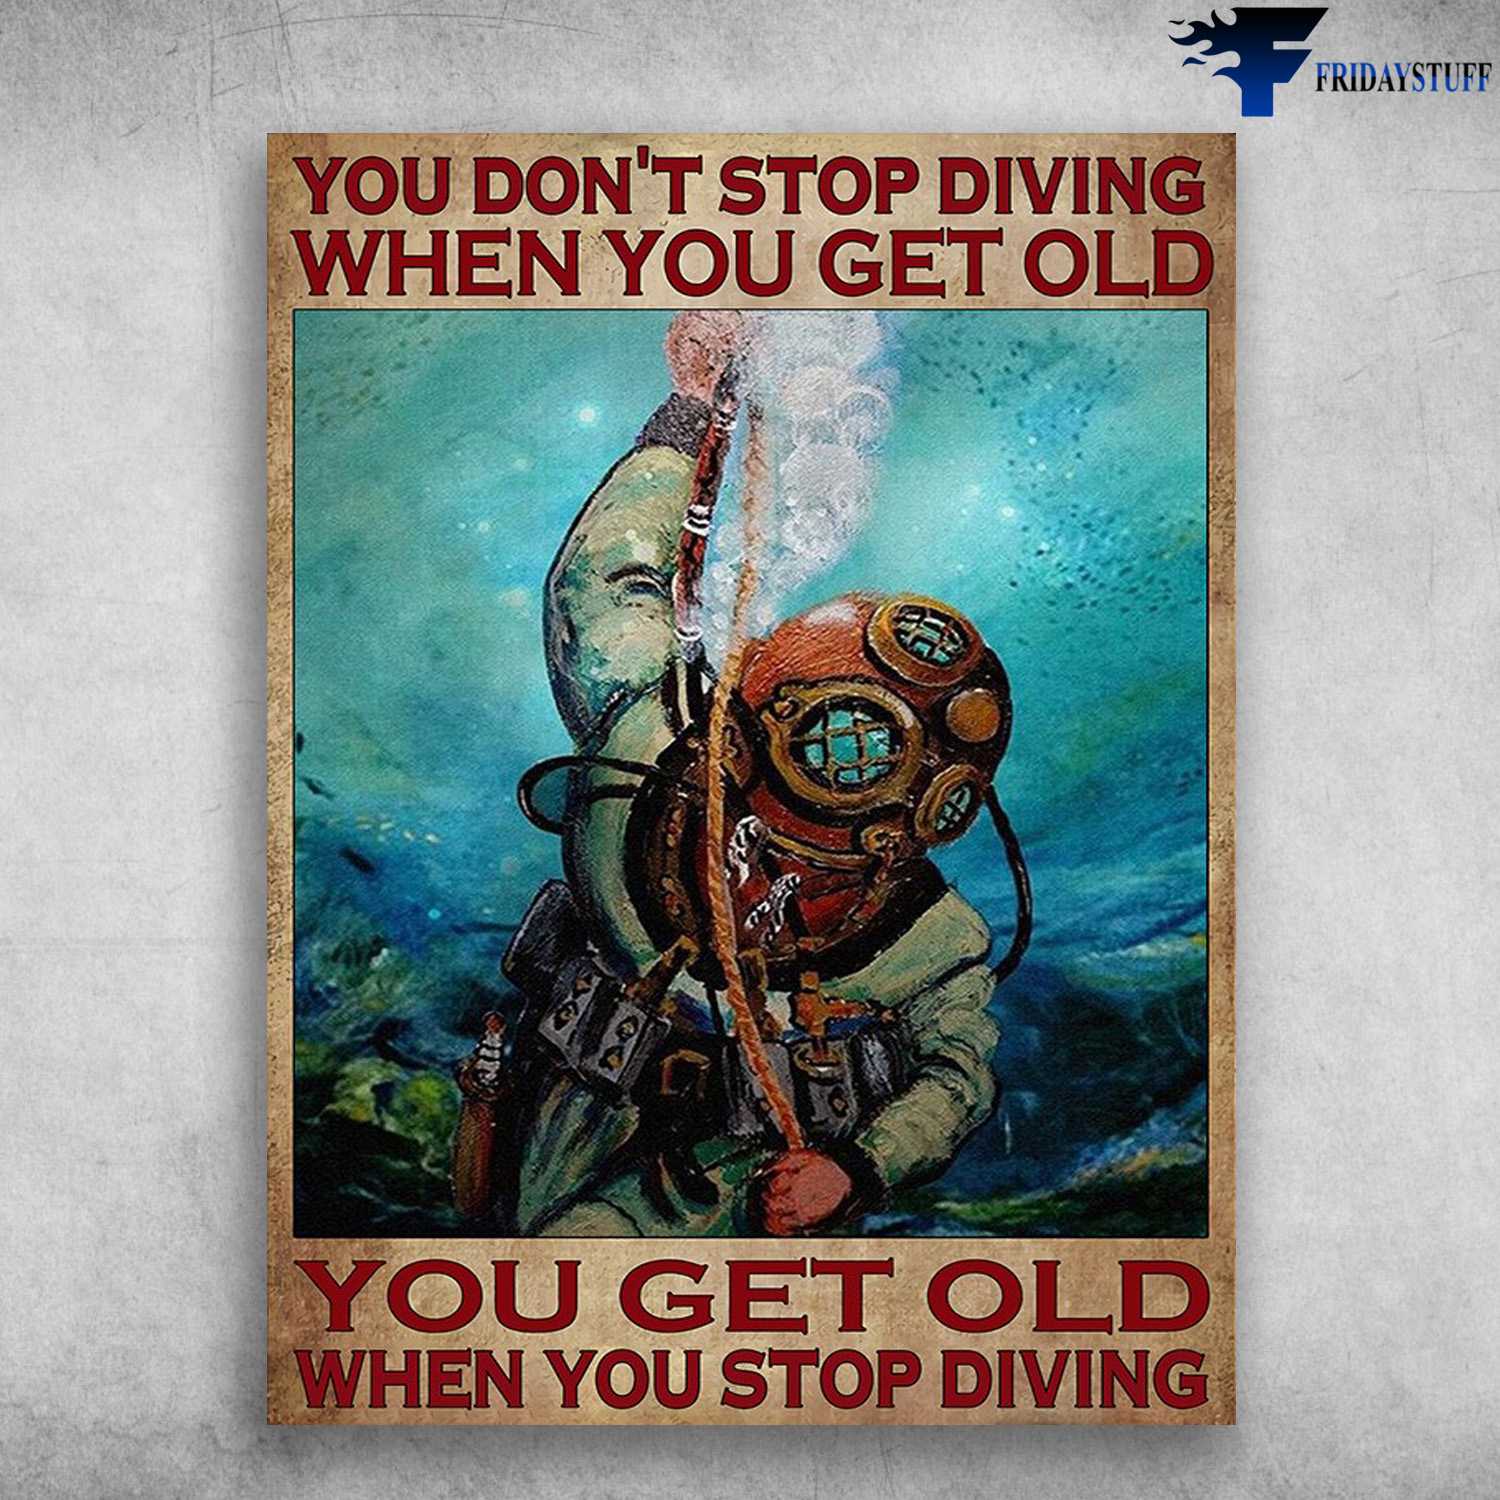 Diving Man, Diver Poster - You Don't Stop Diving When You Get Old, You Get Old When You Stop Diving